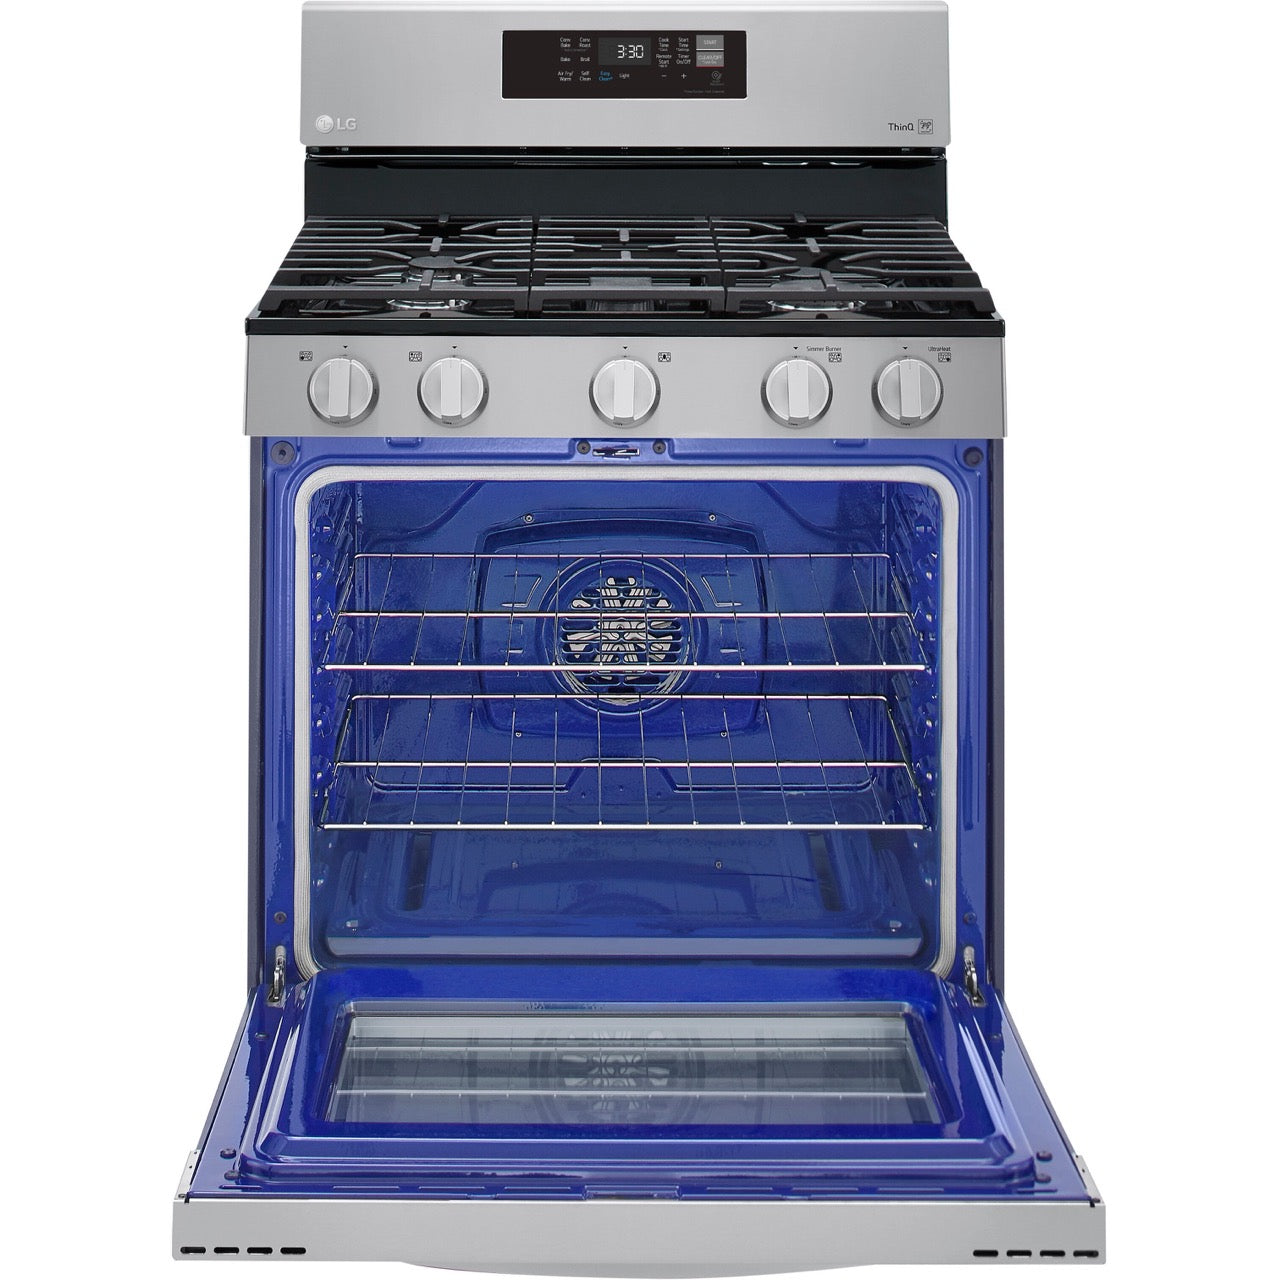 LG 5.8-Cu. Ft. Gas Convection Smart Range with AirFry, Stainless Steel (LRGL5823S)